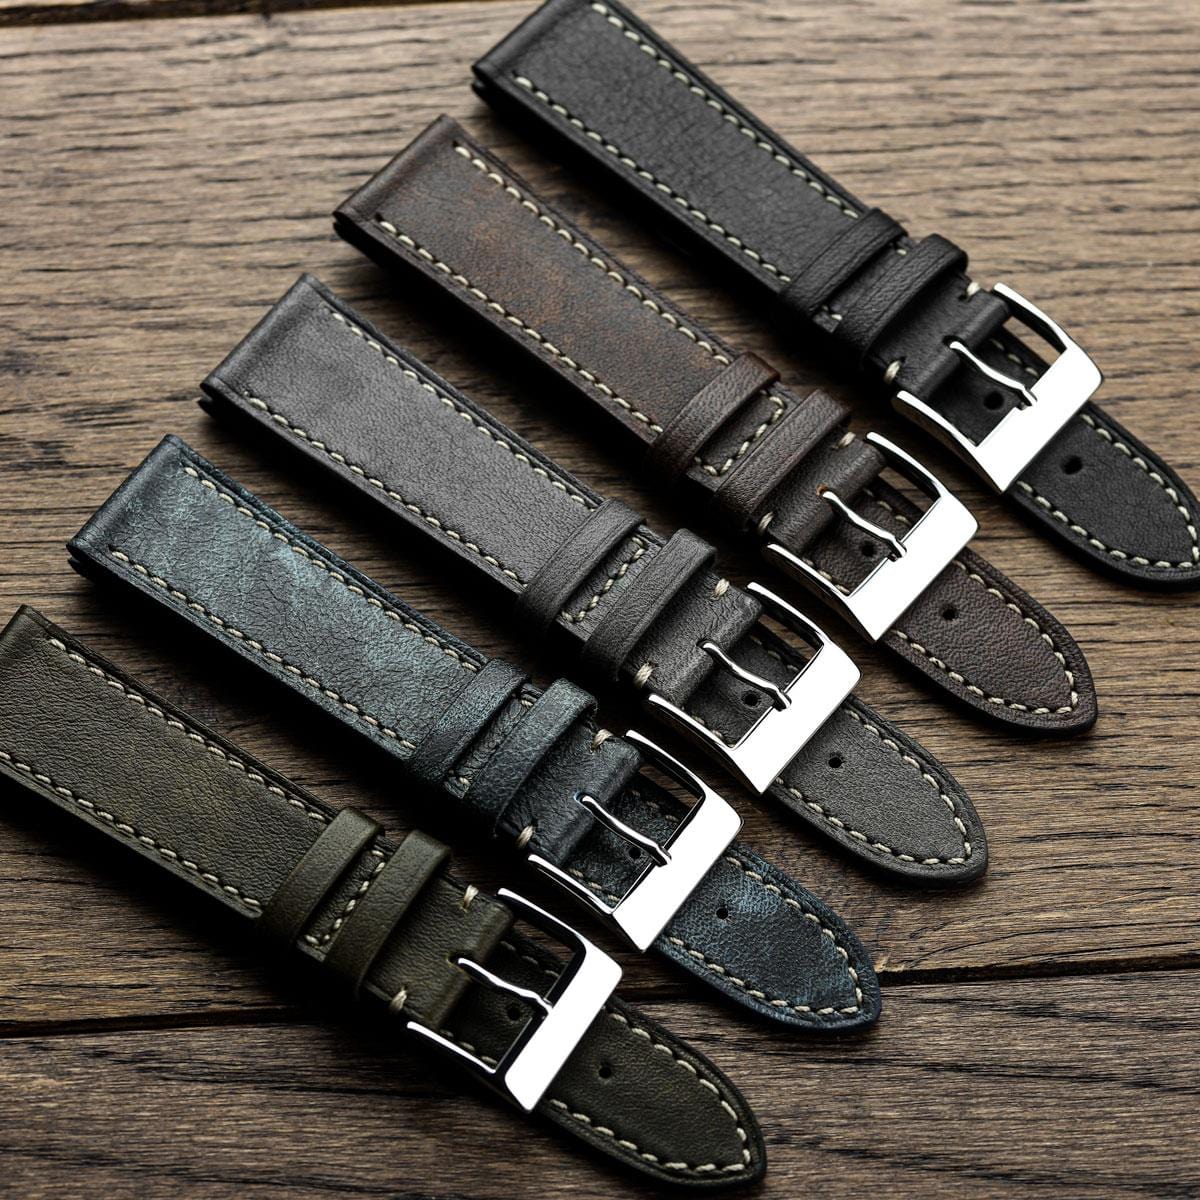 Rochefort Flat Patina Calf Leather Watch Strap - Blue Jeans